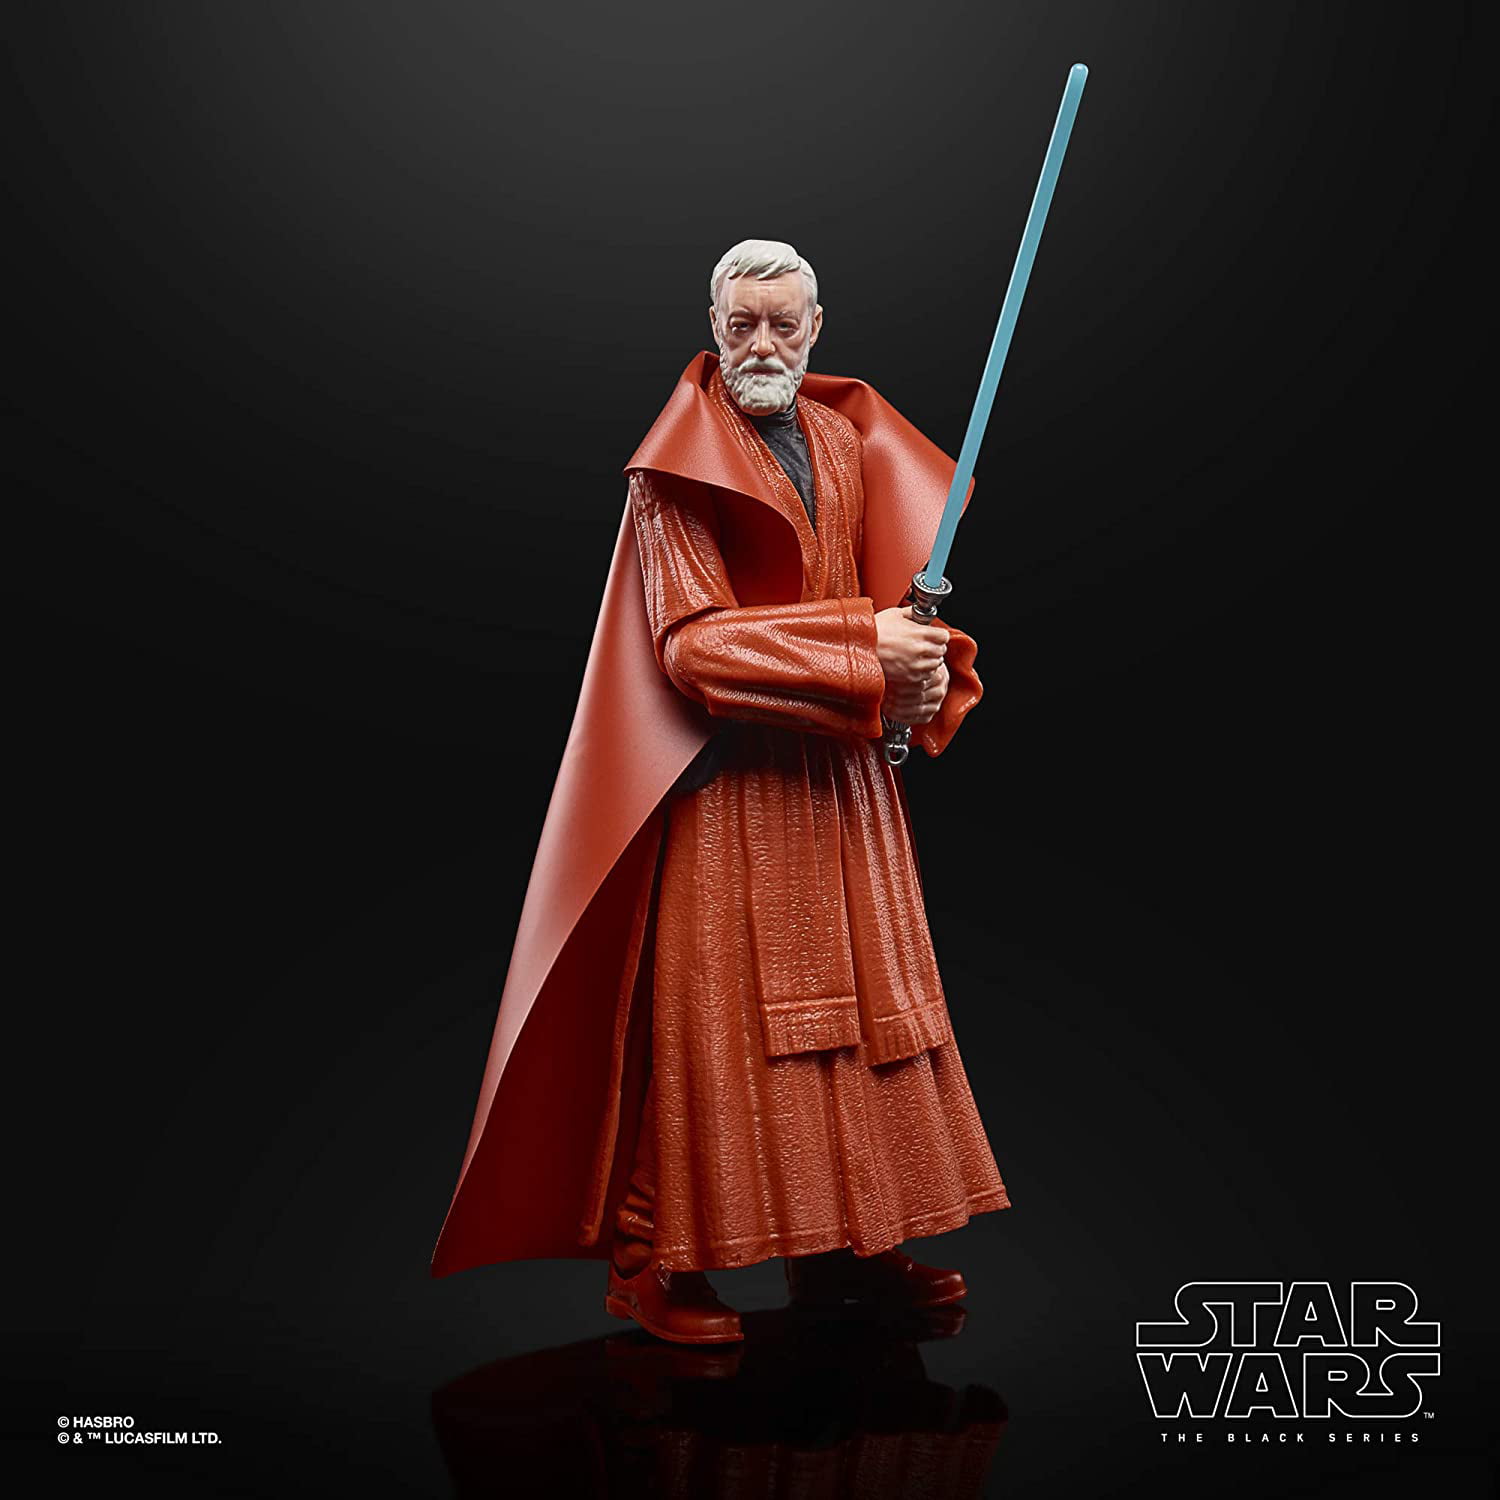 The Clone Wars Collectible Action Figure Star Wars The Black Series Obi-Wan Kenobi 6-Inch-Scale Lucasfilm 50th Anniversary Star Wars